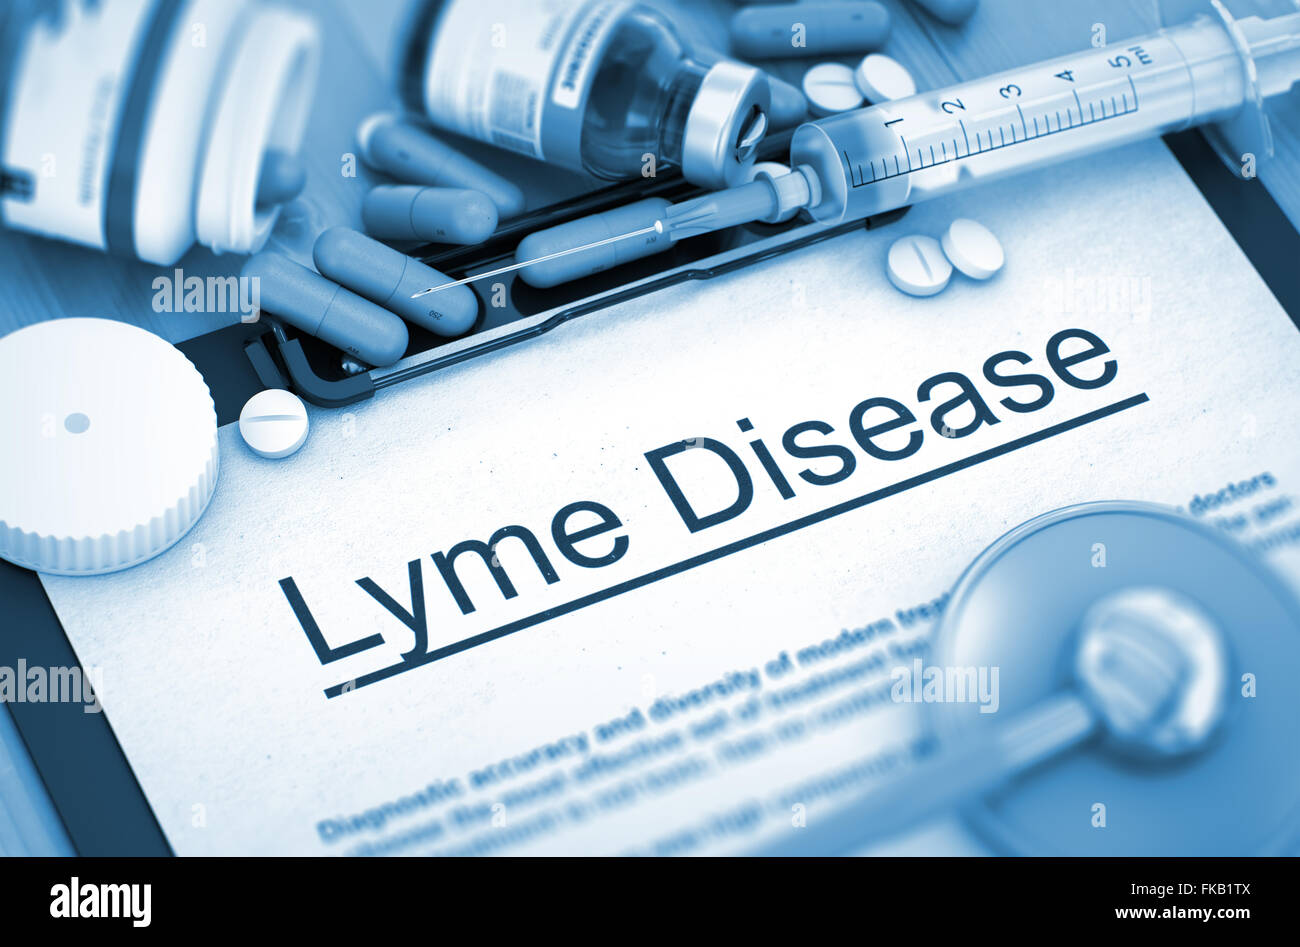 Lyme Disease. Medical Concept. Stock Photo